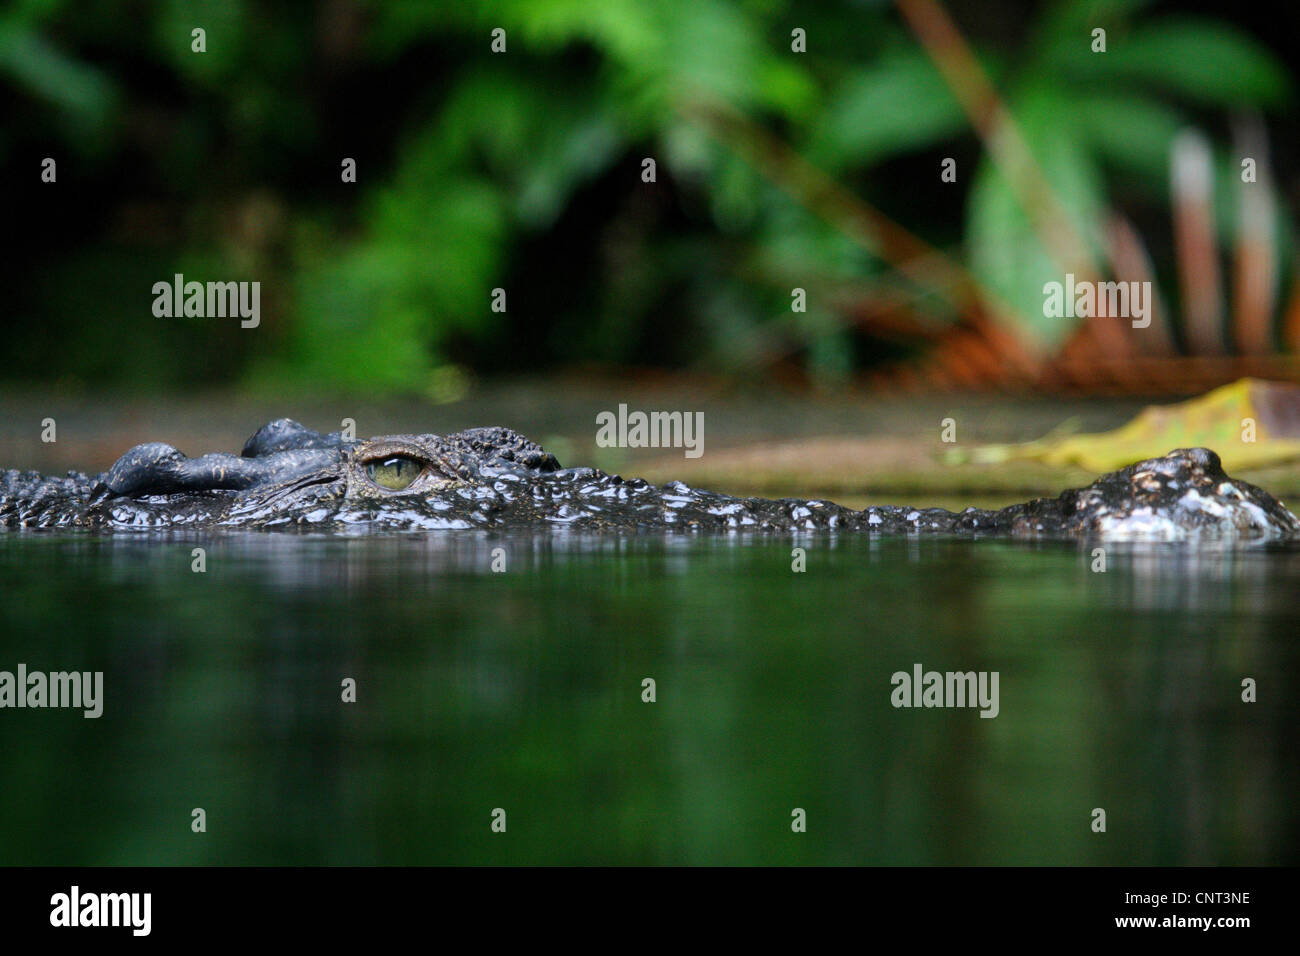 false gharial, Malayan gharial (Tomistoma schlegelii), portrait submerging Stock Photo